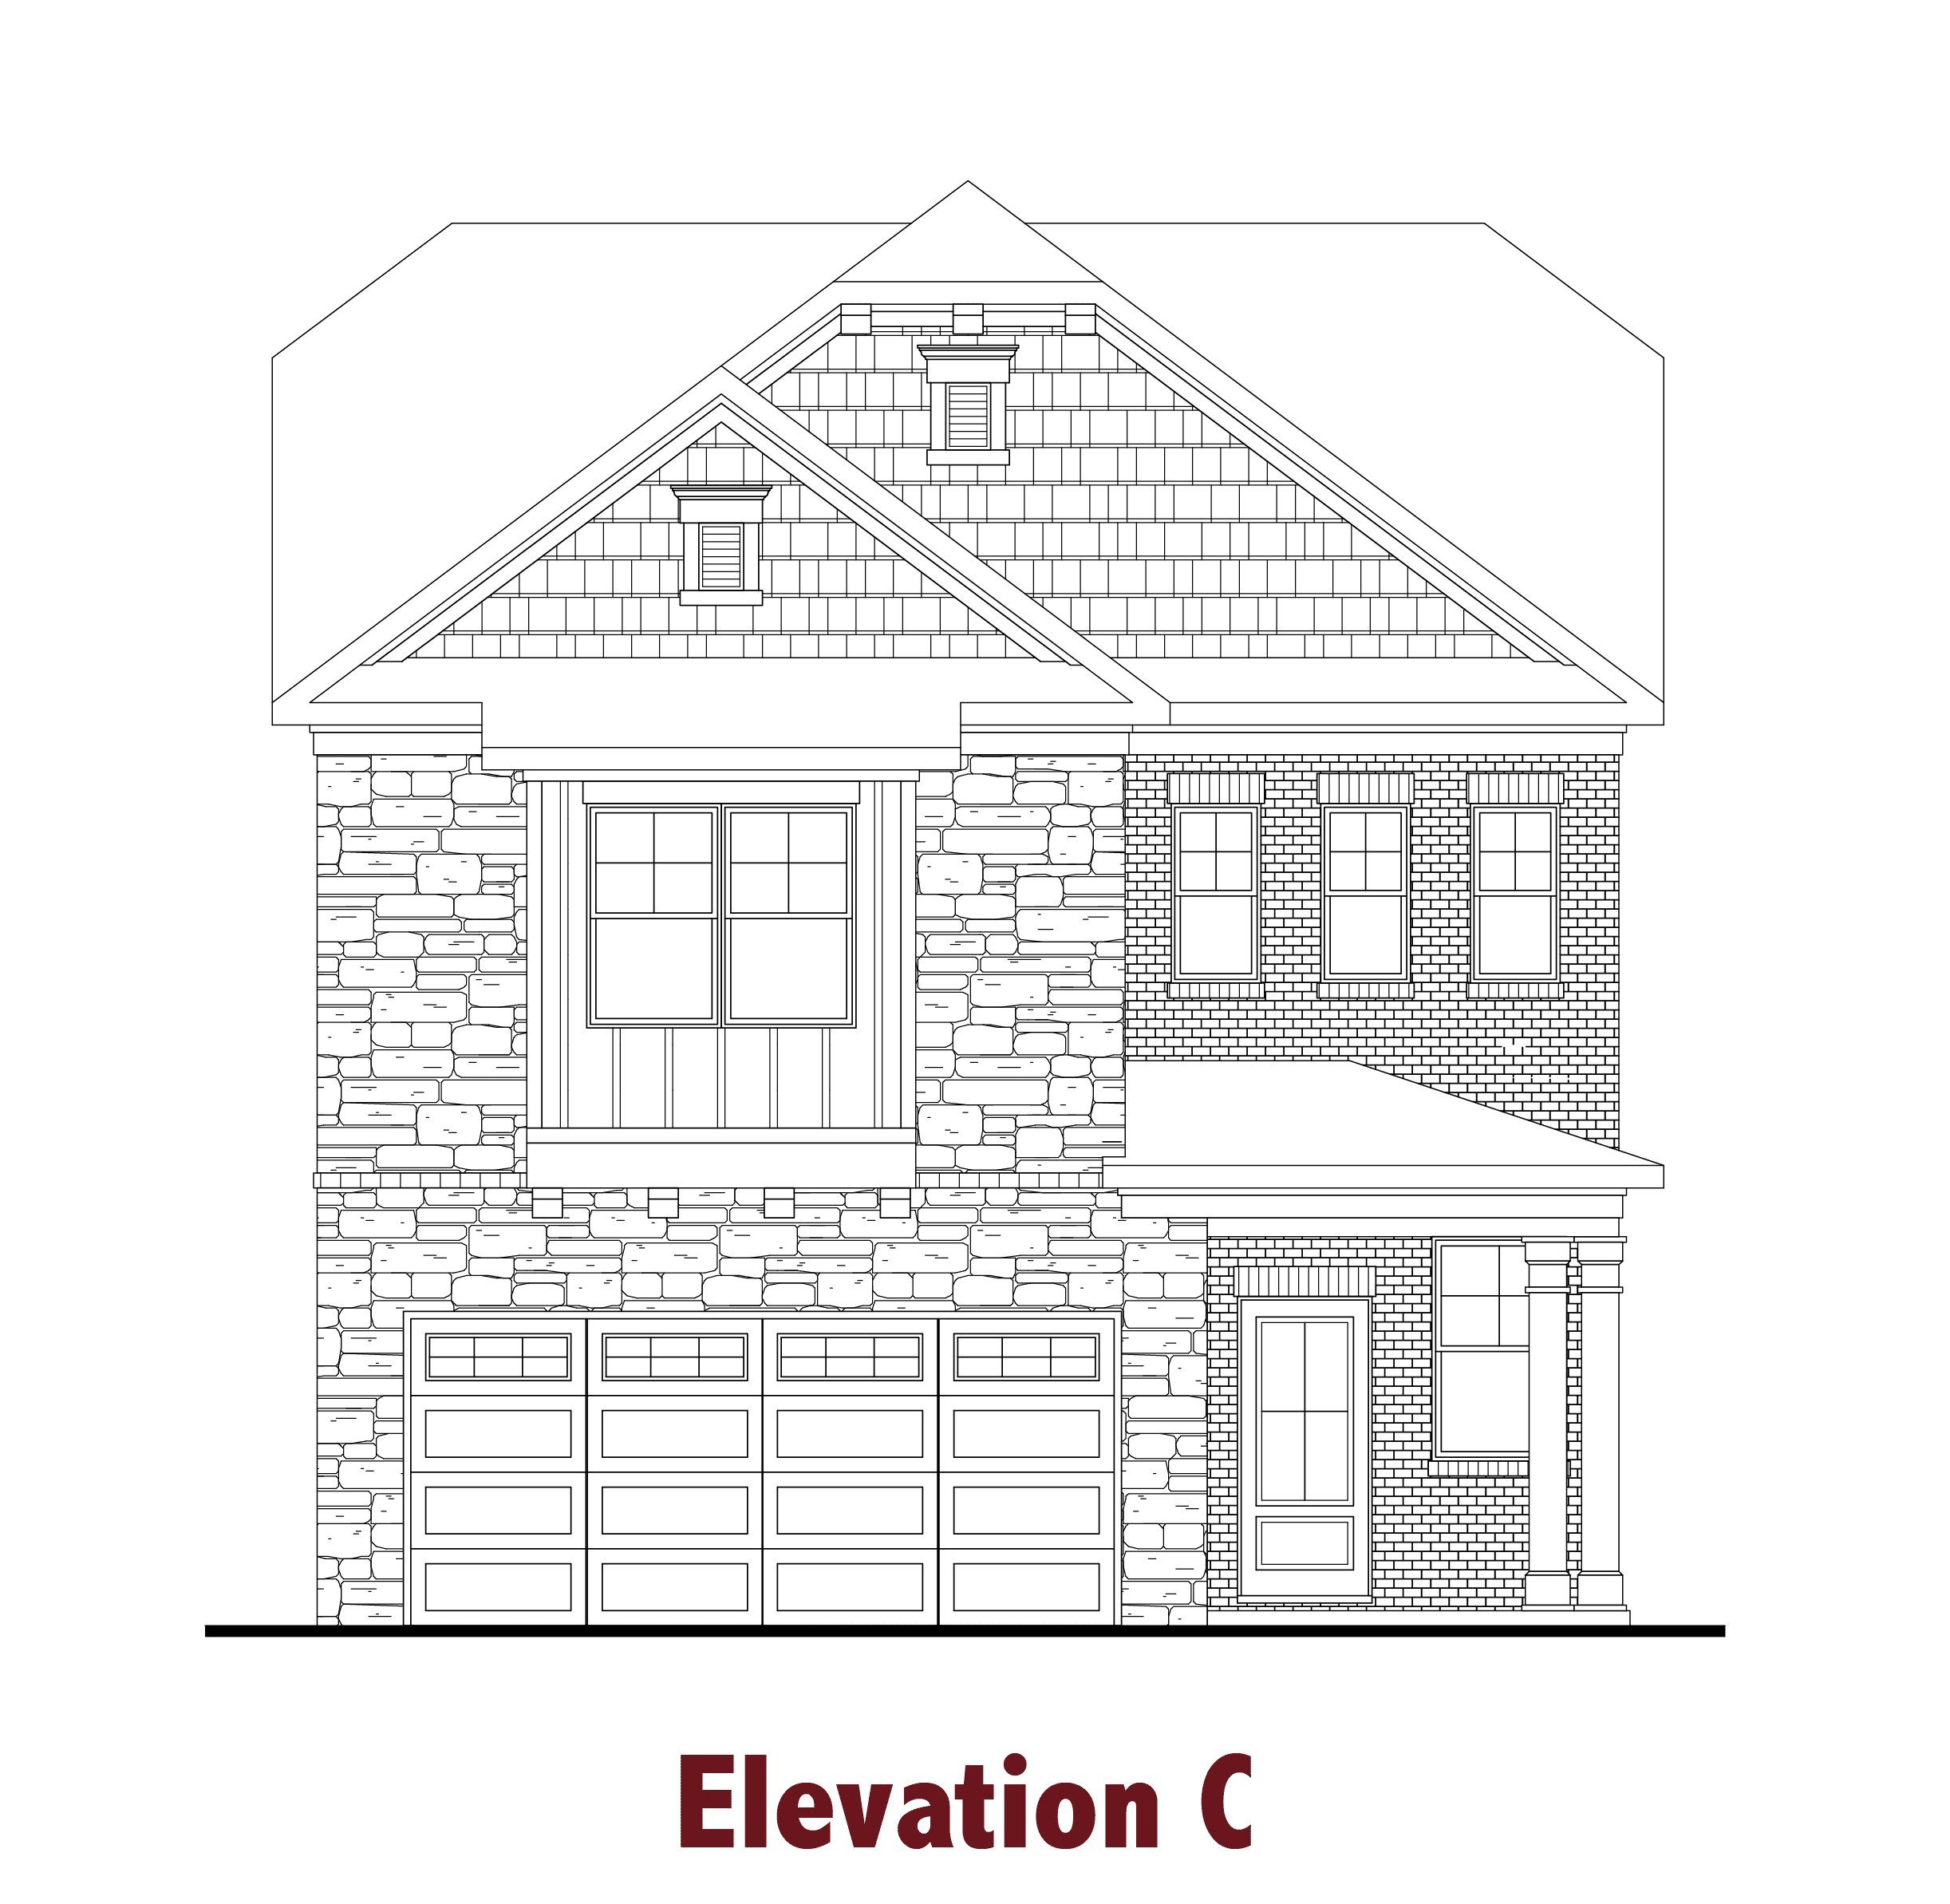 Holly elevations Image